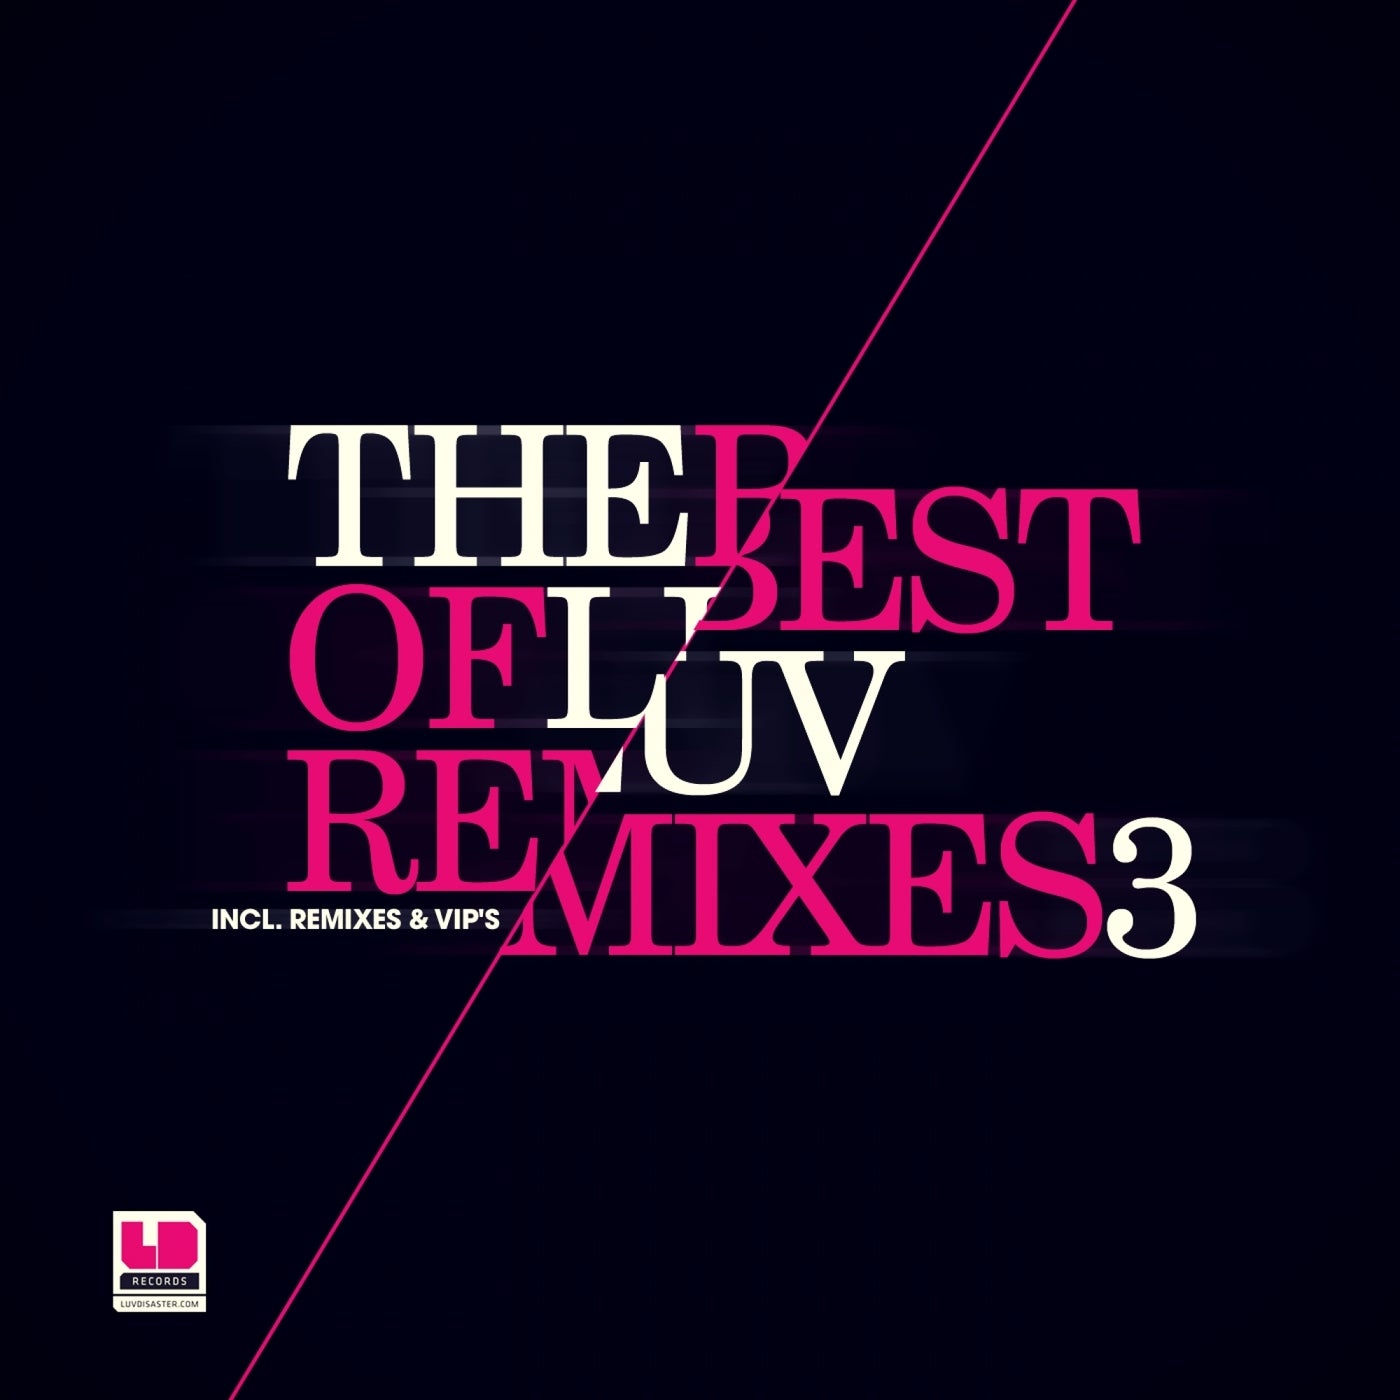 The Best of Luv Remixes Vol. 3